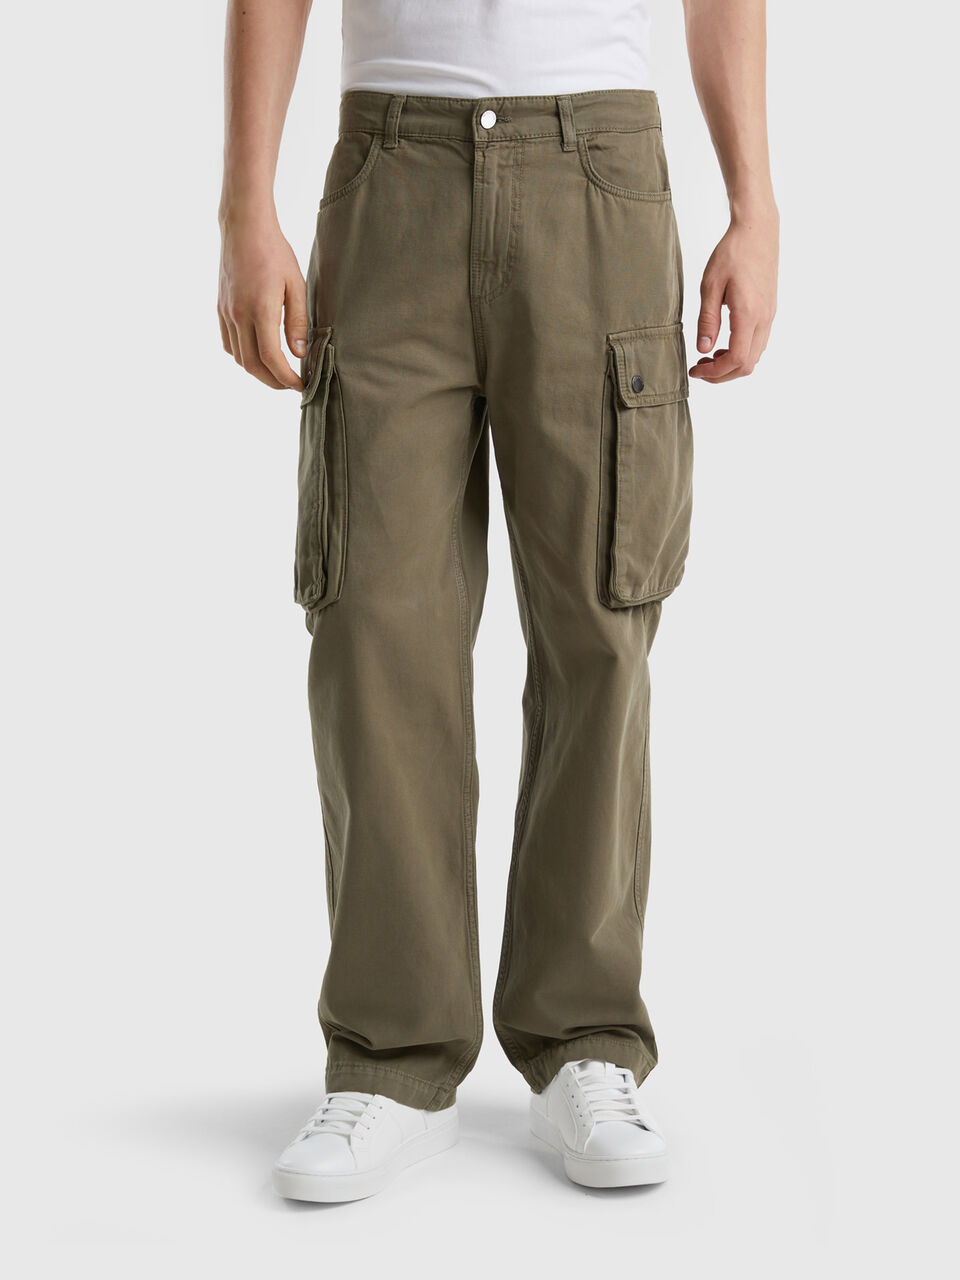 Army green cargo trousers - Military Green